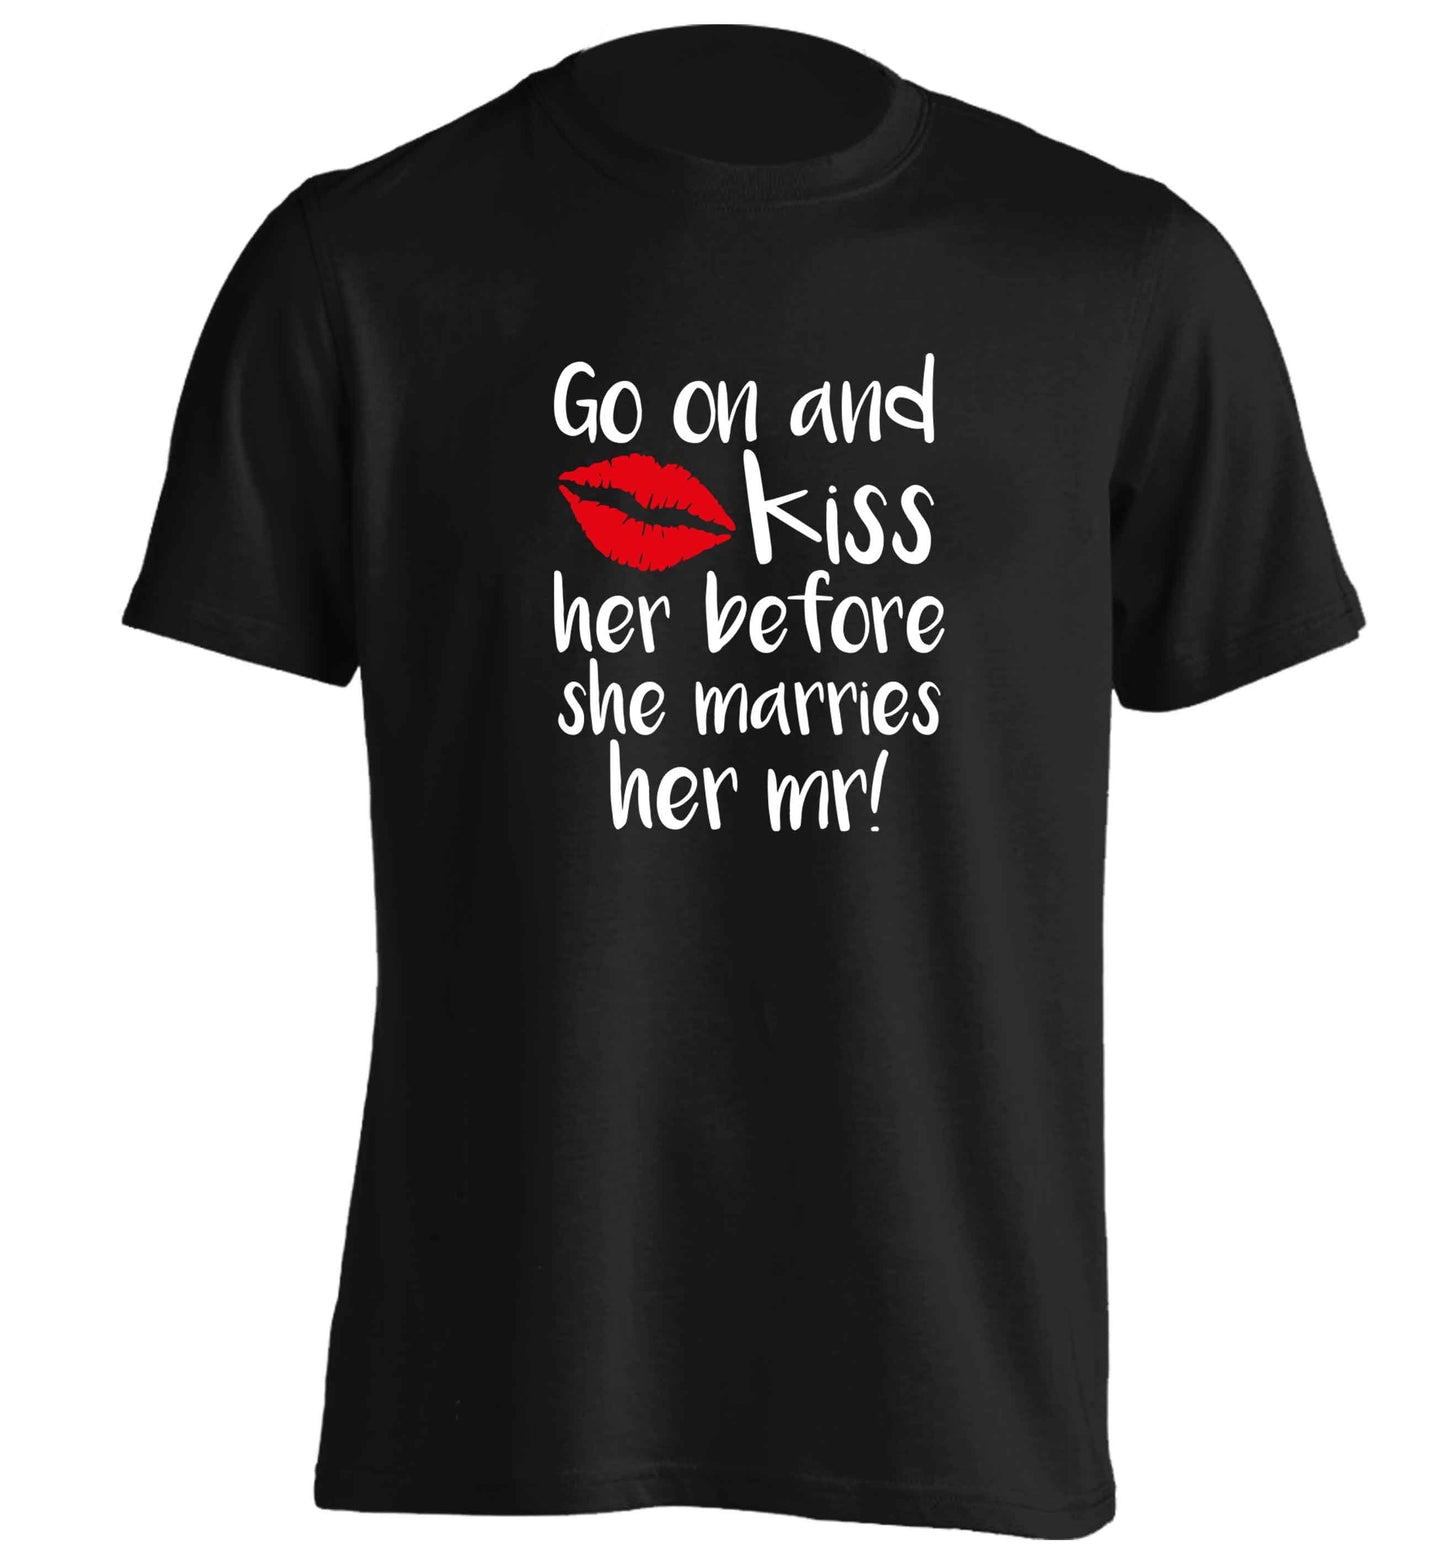 Kiss her before she marries her mr! adults unisex black Tshirt 2XL